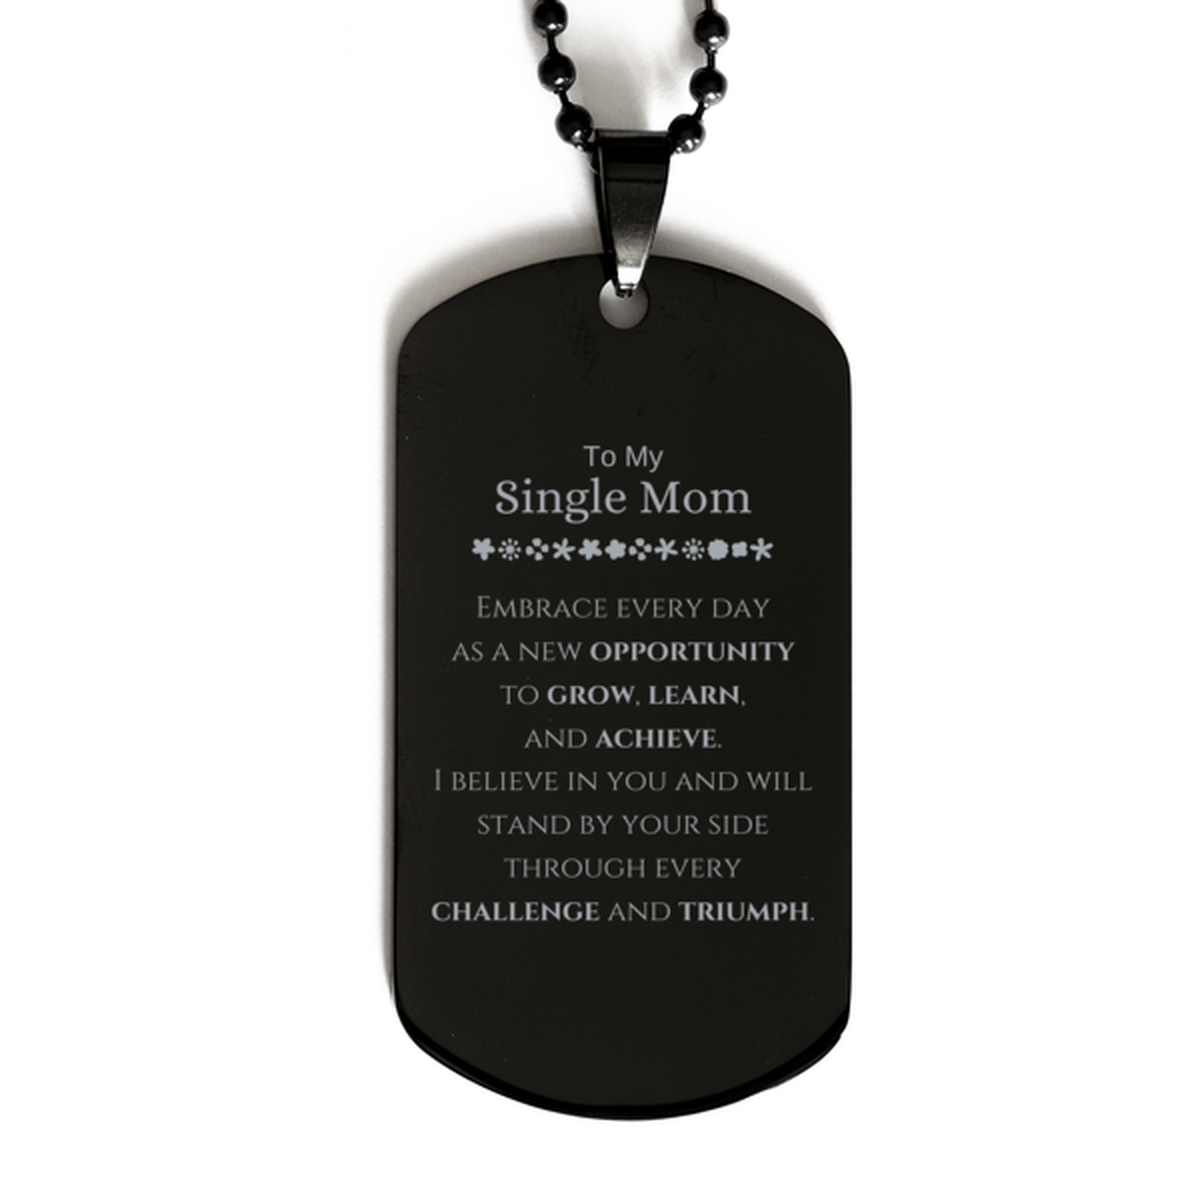 To My Single Mom Gifts, I believe in you and will stand by your side, Inspirational Black Dog Tag For Single Mom, Birthday Christmas Motivational Single Mom Gifts